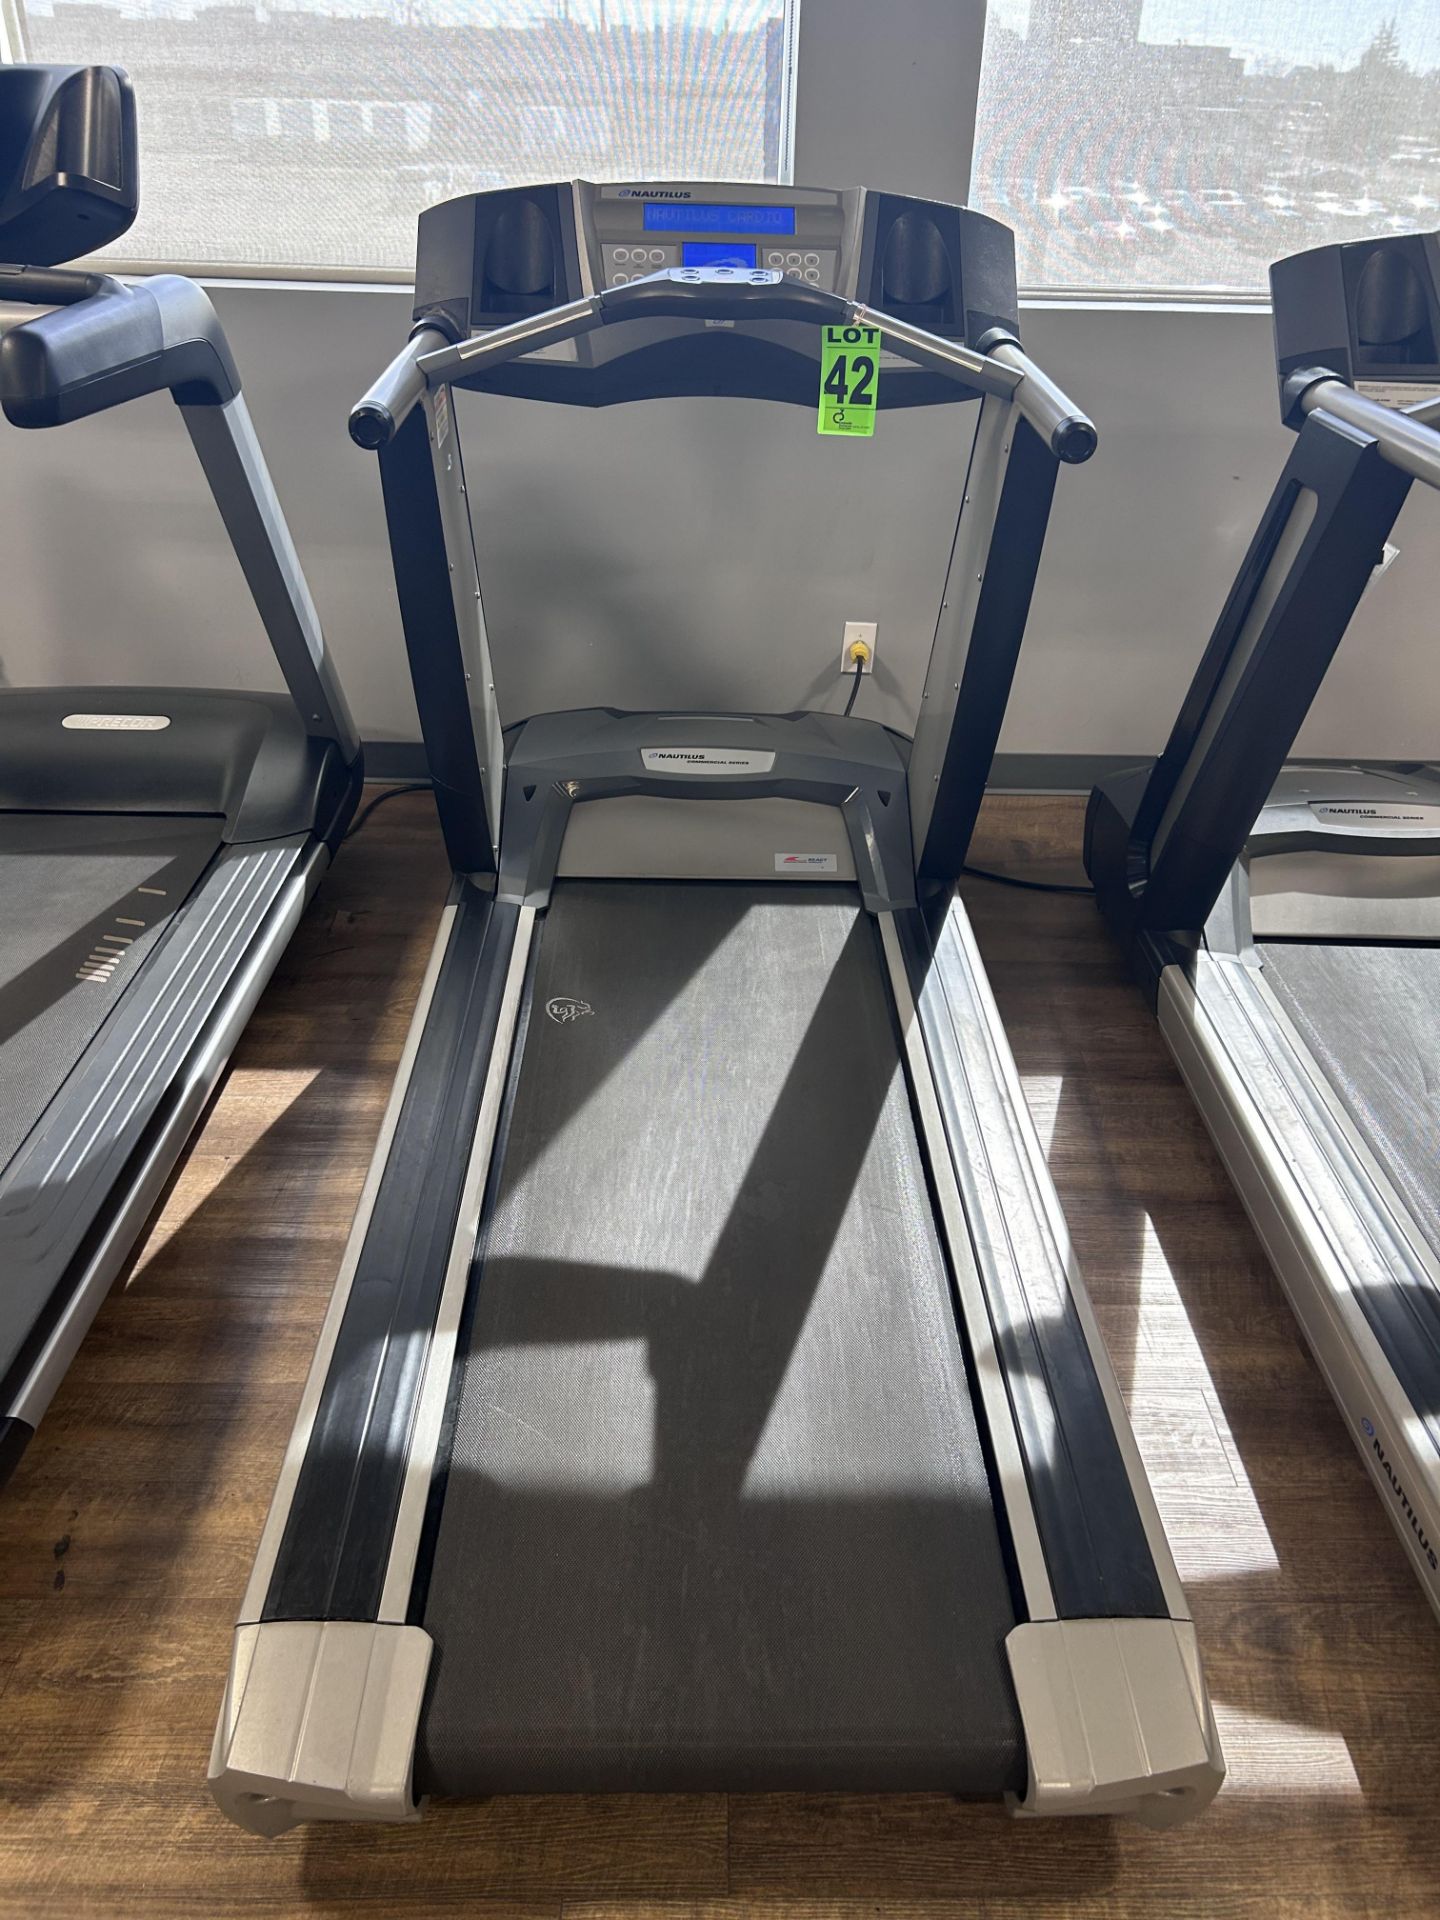 NAUTILUS mod. T914 Commercial Treadmill with backlit LED Console